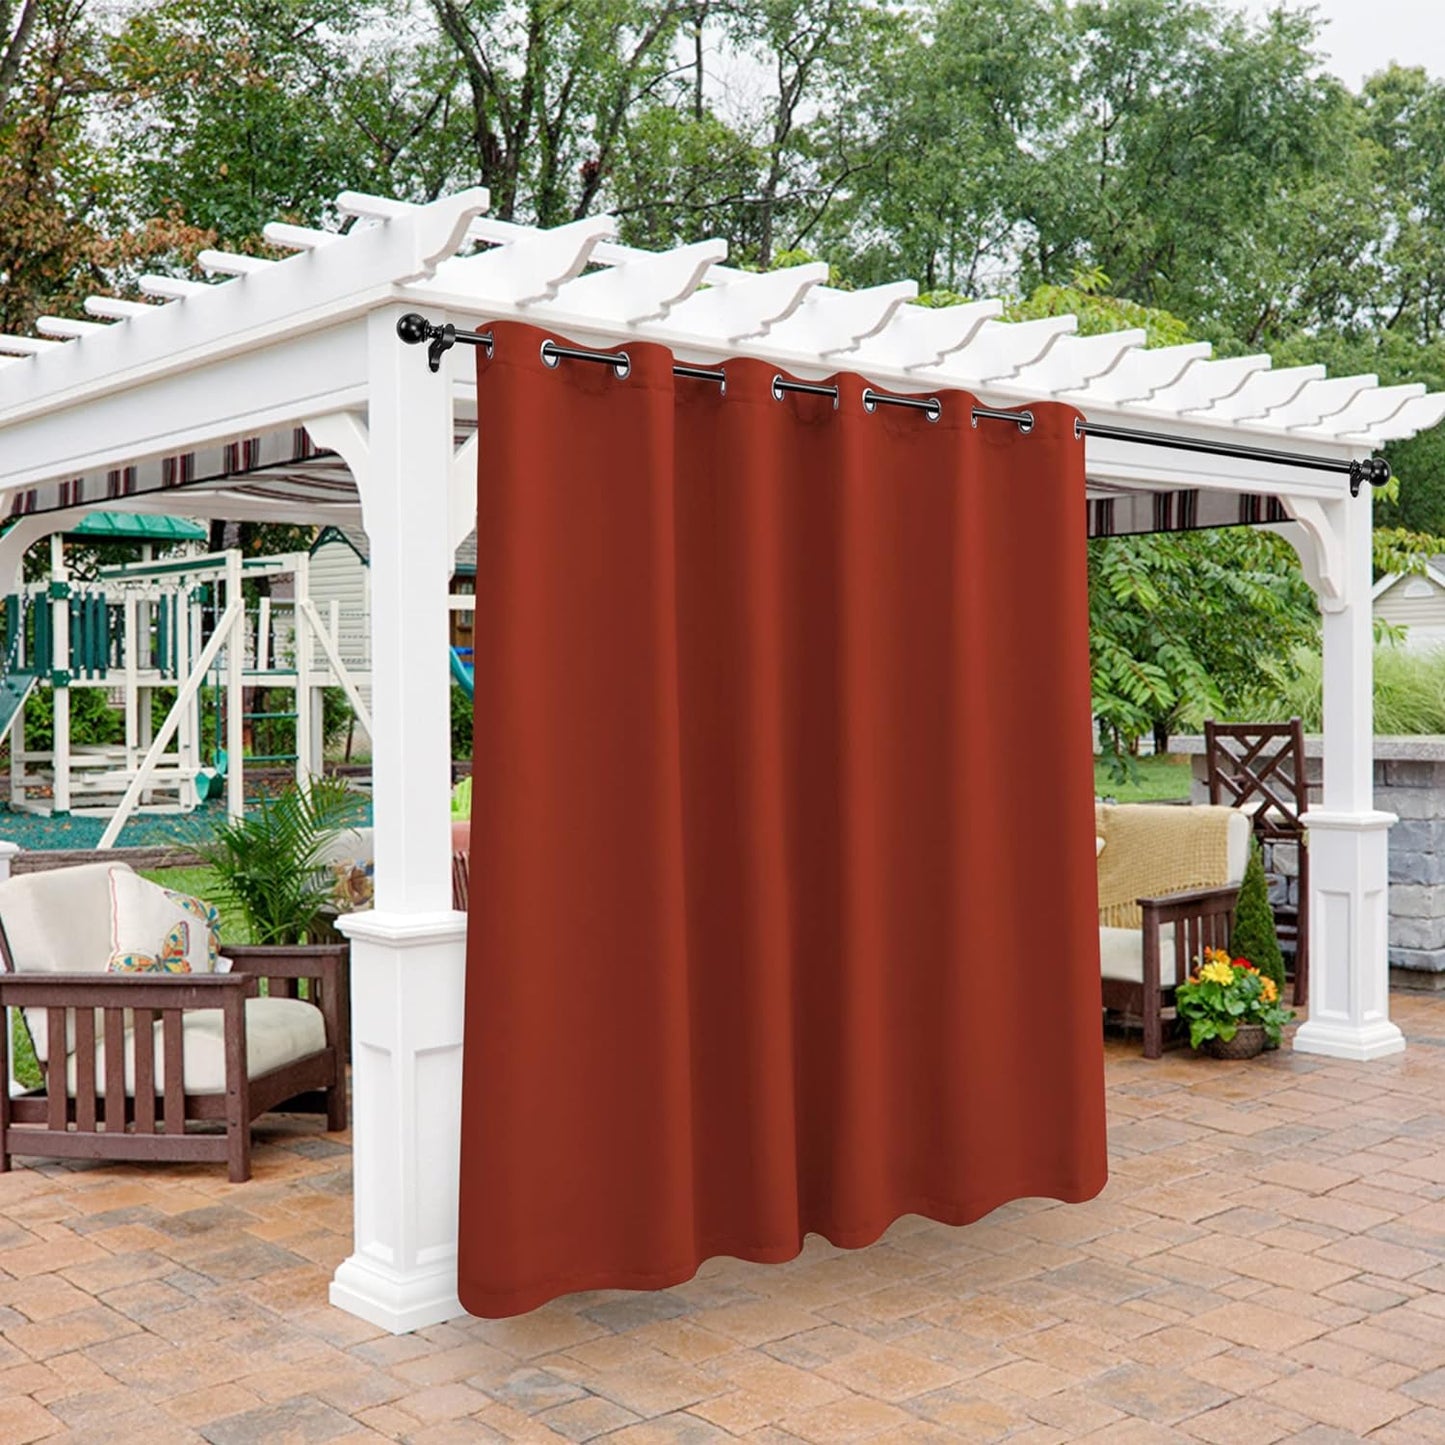 BONZER Outdoor Curtains for Patio Waterproof - Light Blocking Weather Resistant Privacy Grommet Blackout Curtains for Gazebo, Porch, Pergola, Cabana, Deck, Sunroom, 1 Panel, 52W X 84L Inch, Silver  BONZER Orange 100W X 95 Inch 